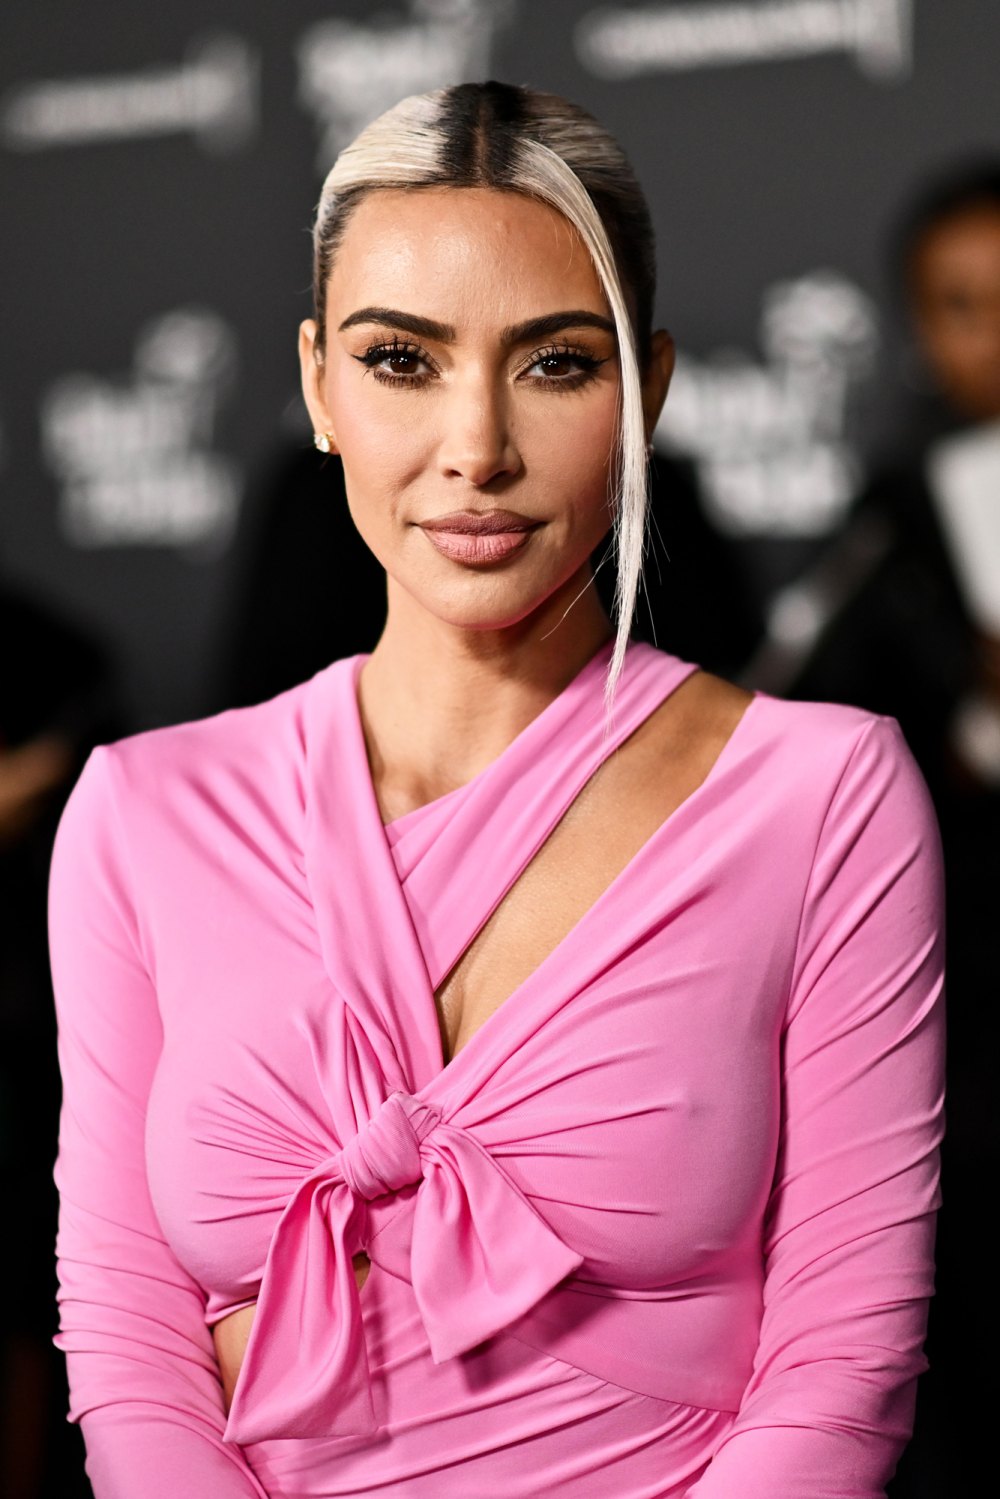 Kim Kardashian Discusses Dealing With 'Pee Anxiety' Over the Years